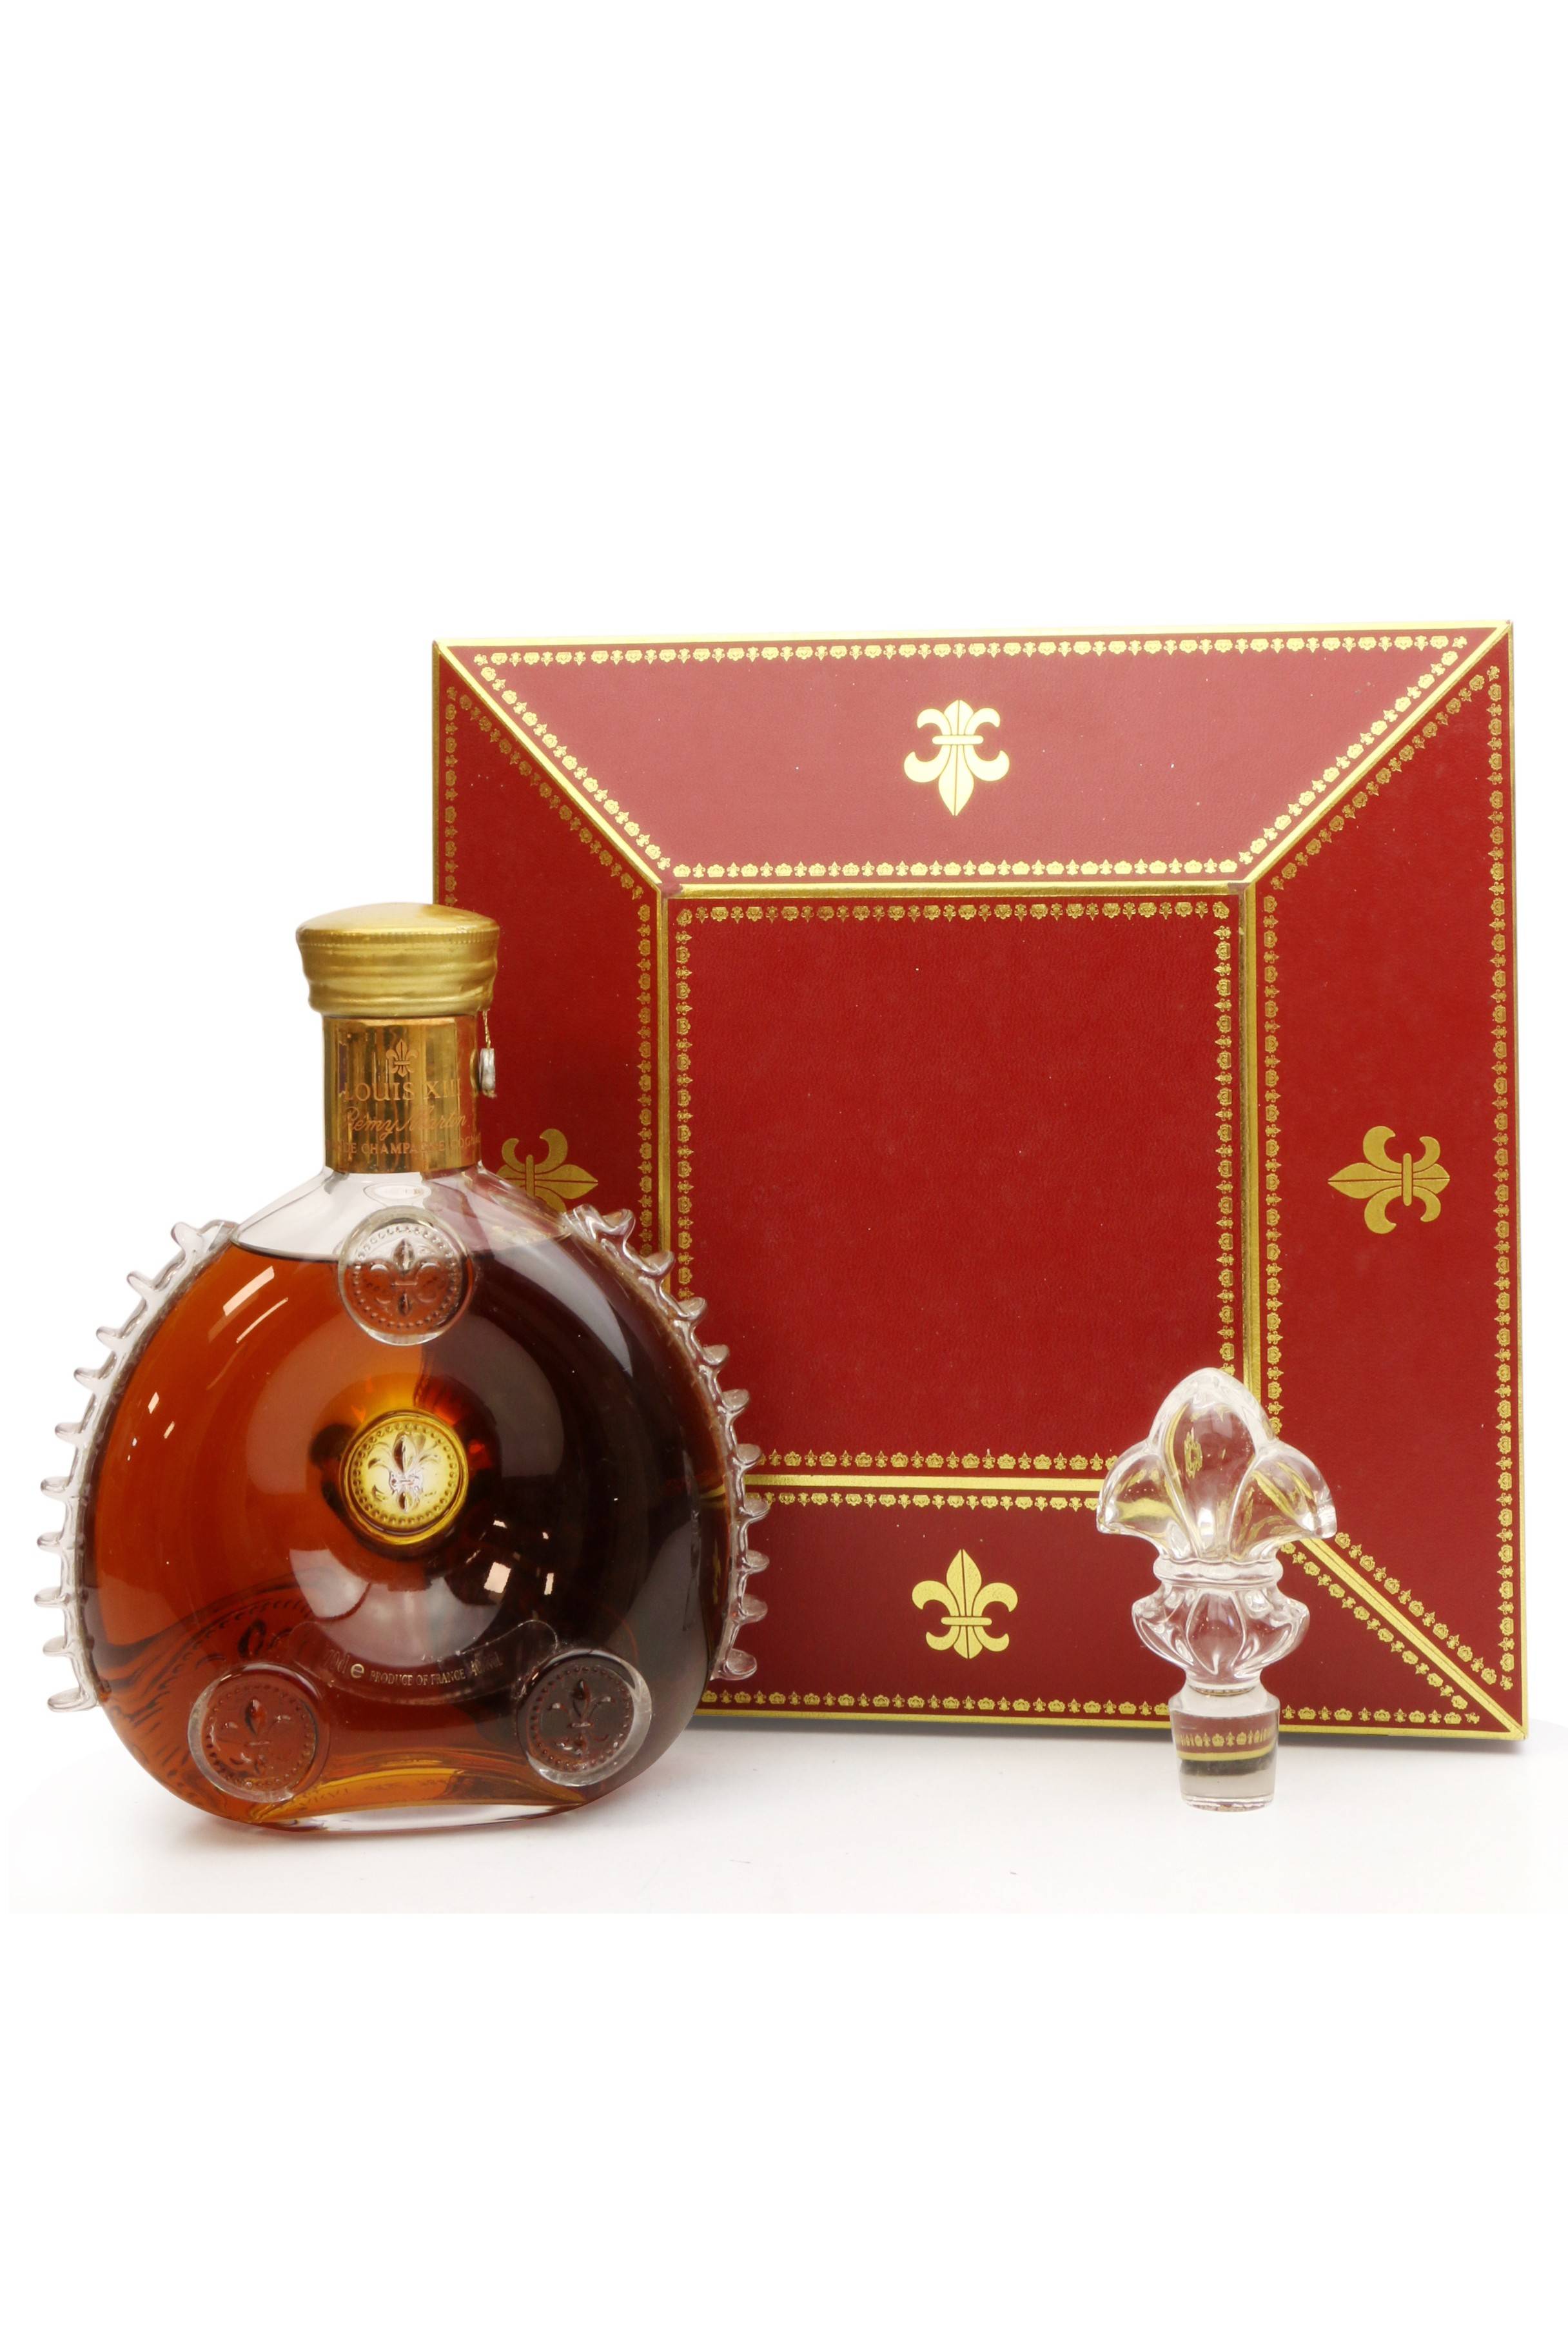 Sold at Auction: An empty Louis XIII Remy Martin Grand Champagne